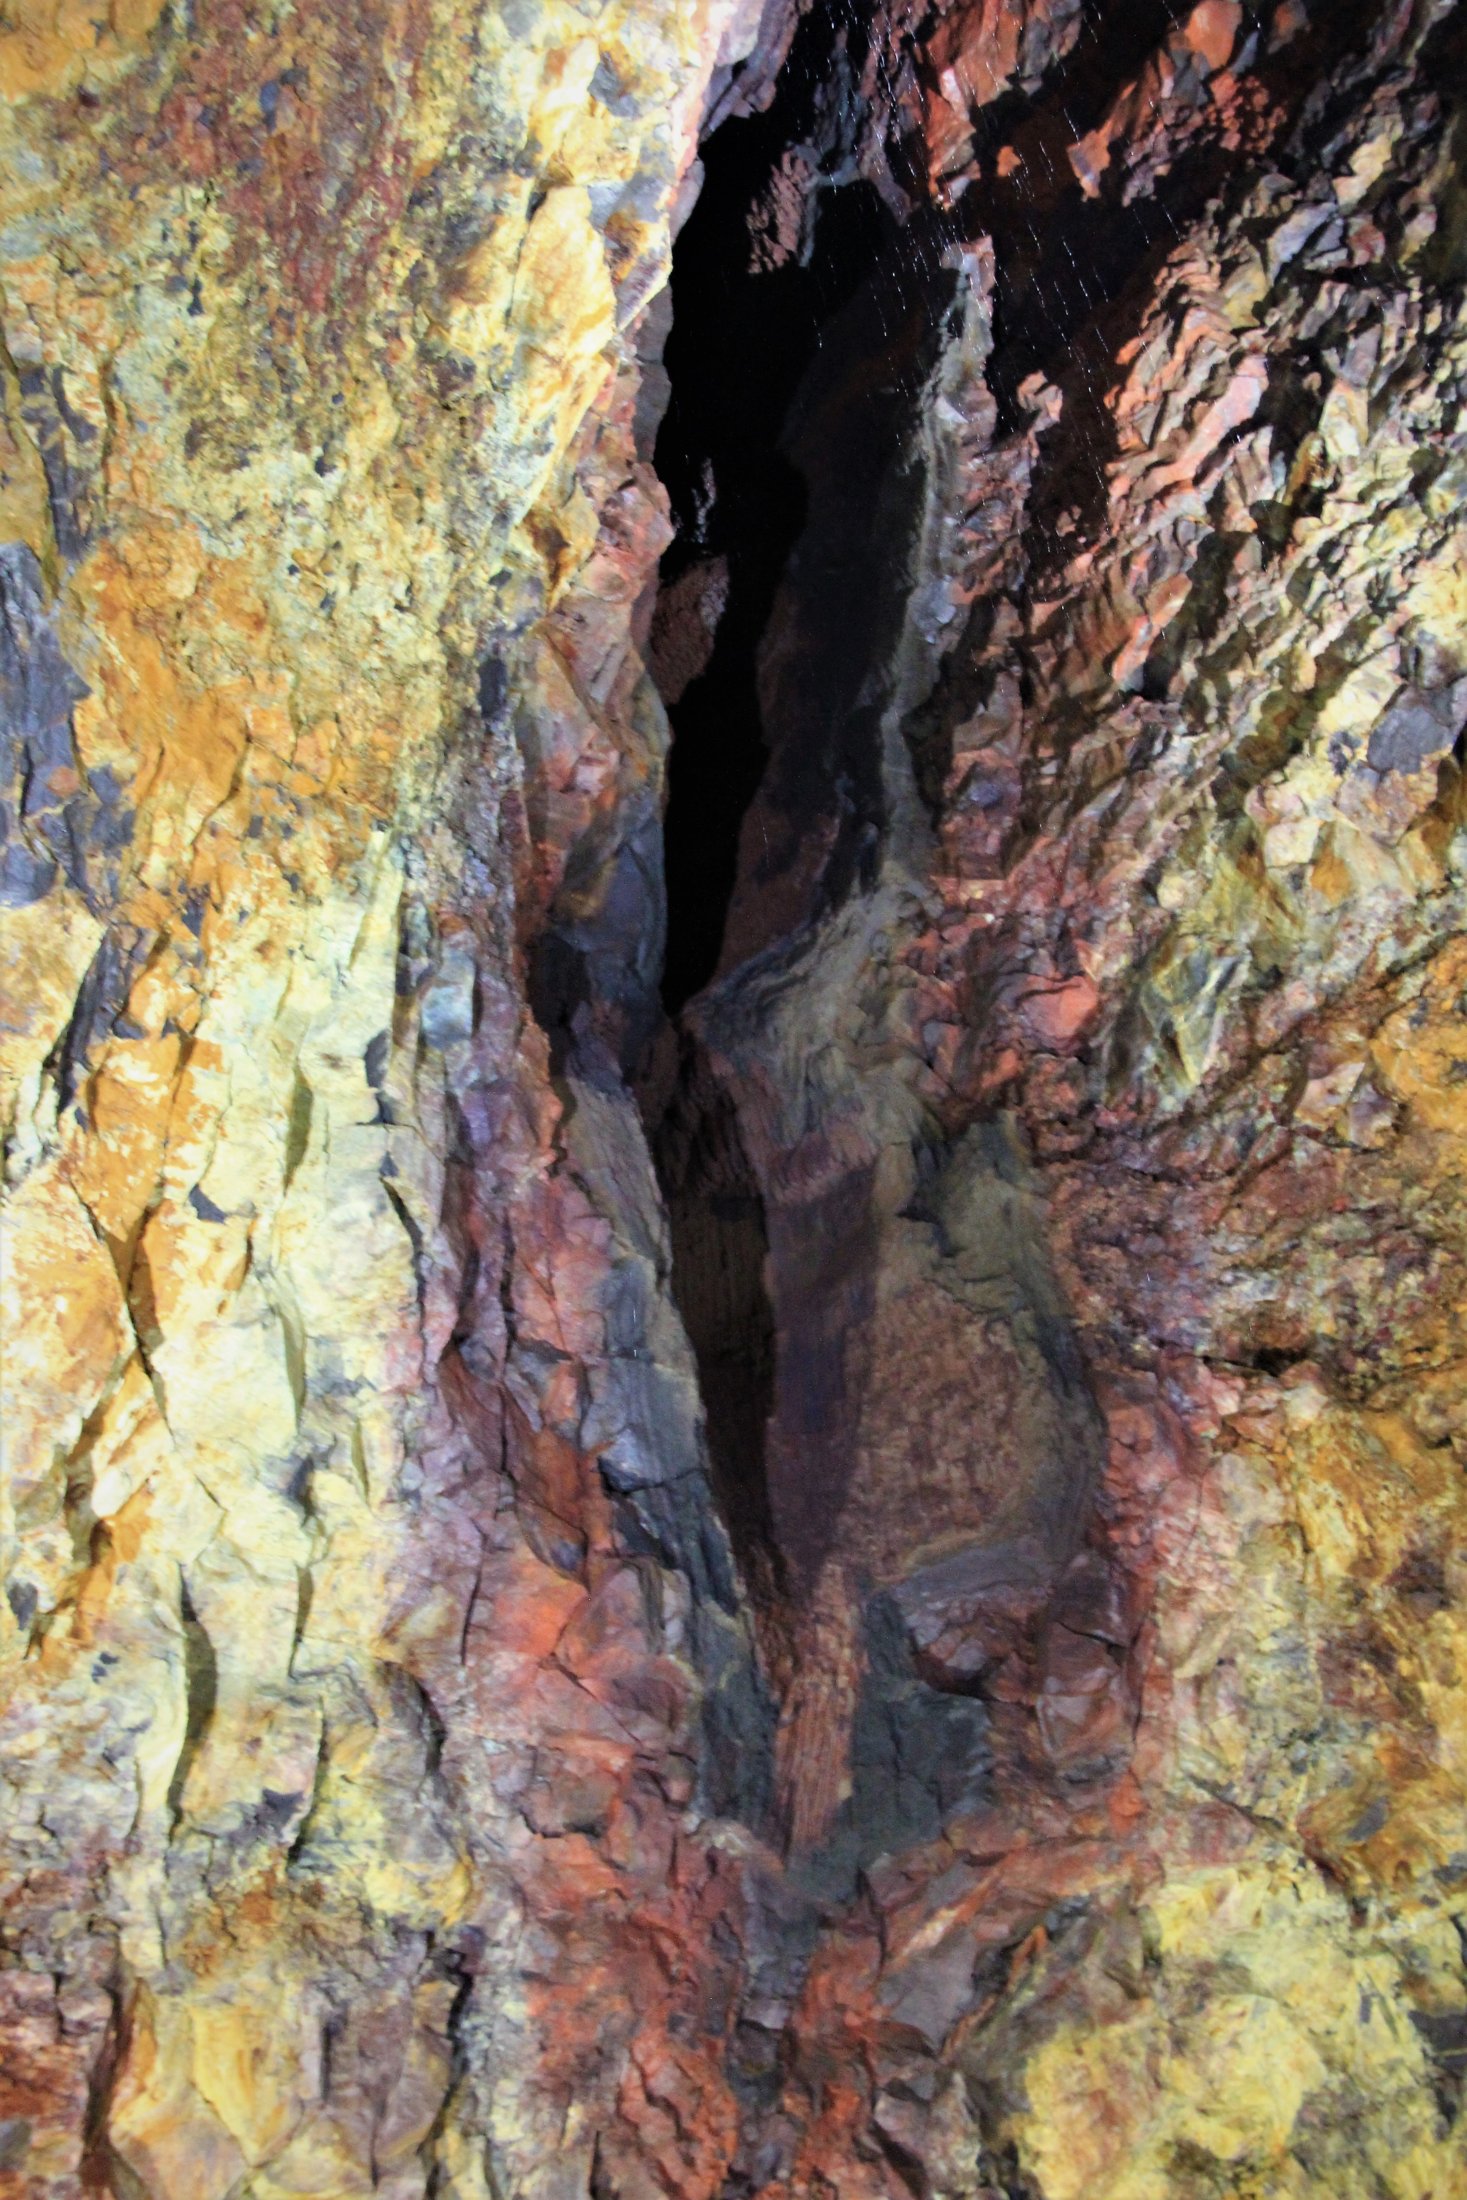 A fissure inside the volcano